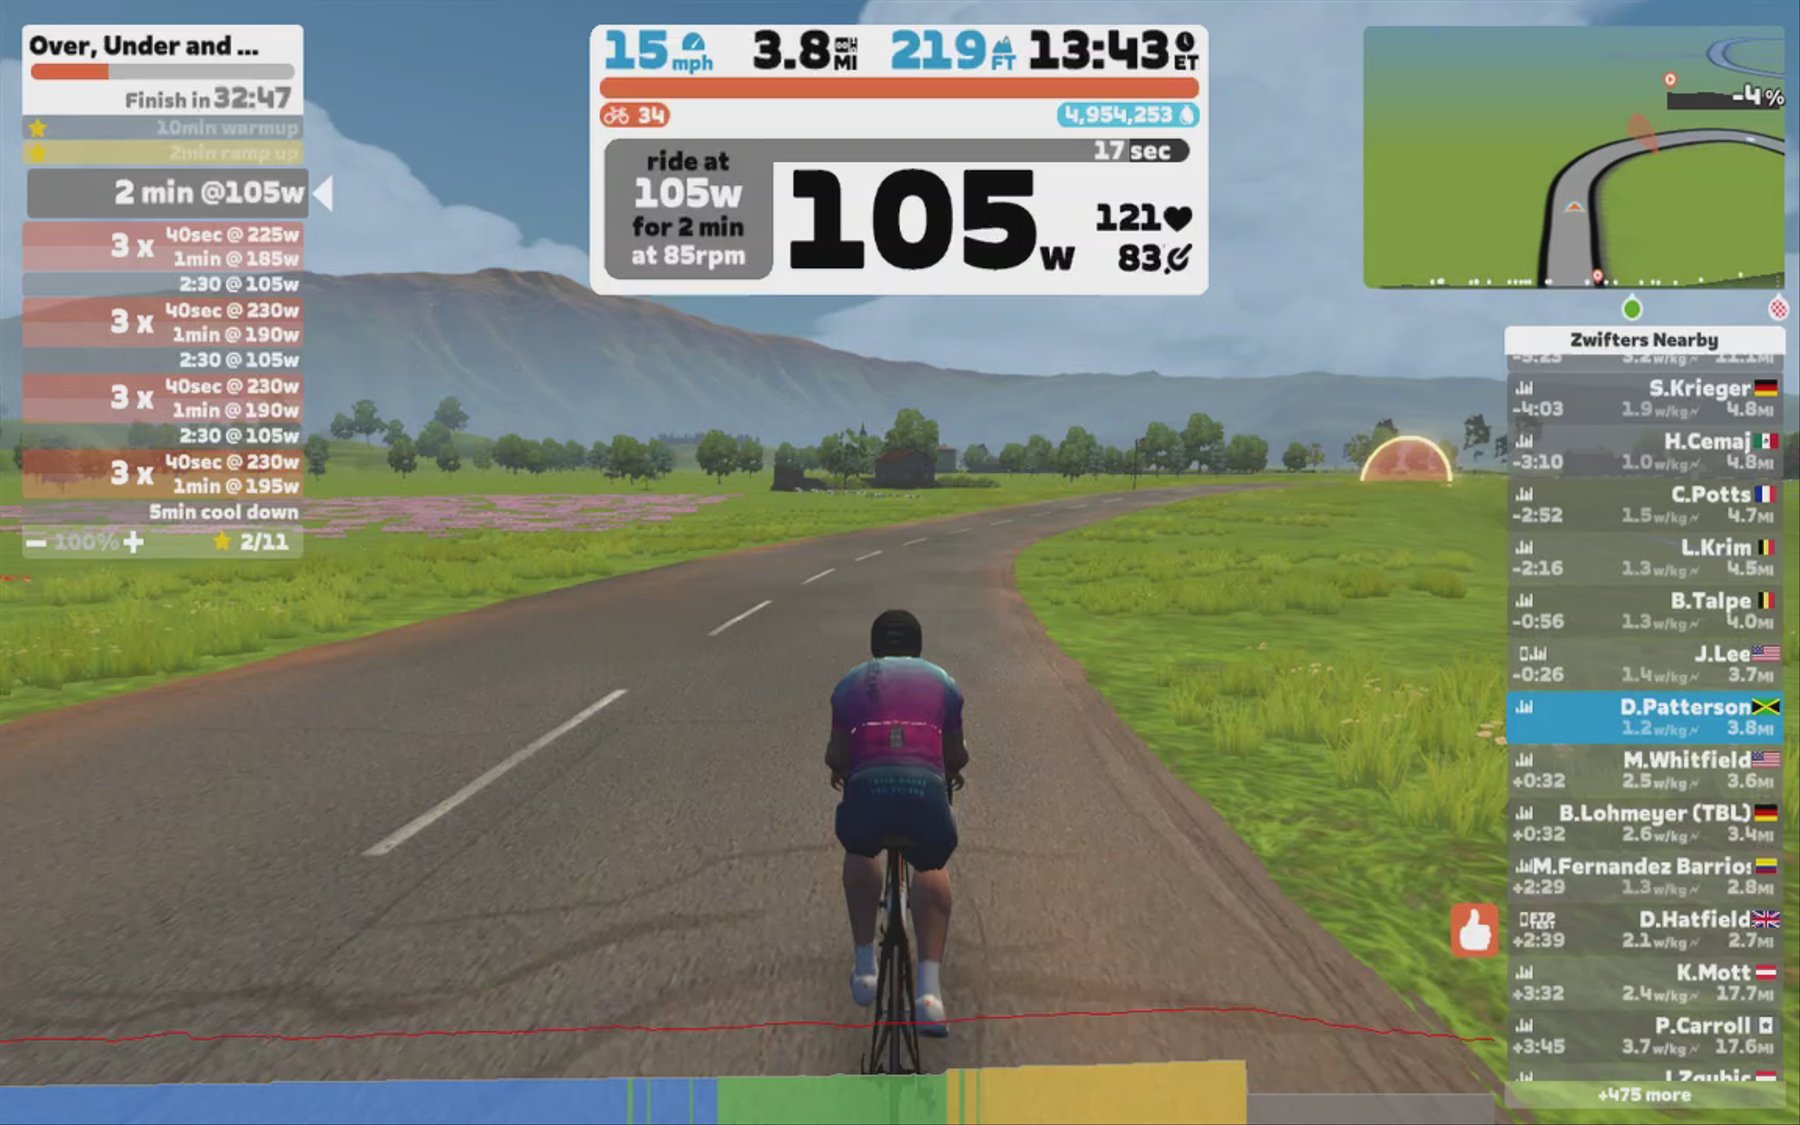 Zwift - Over, Under and Beyond in France